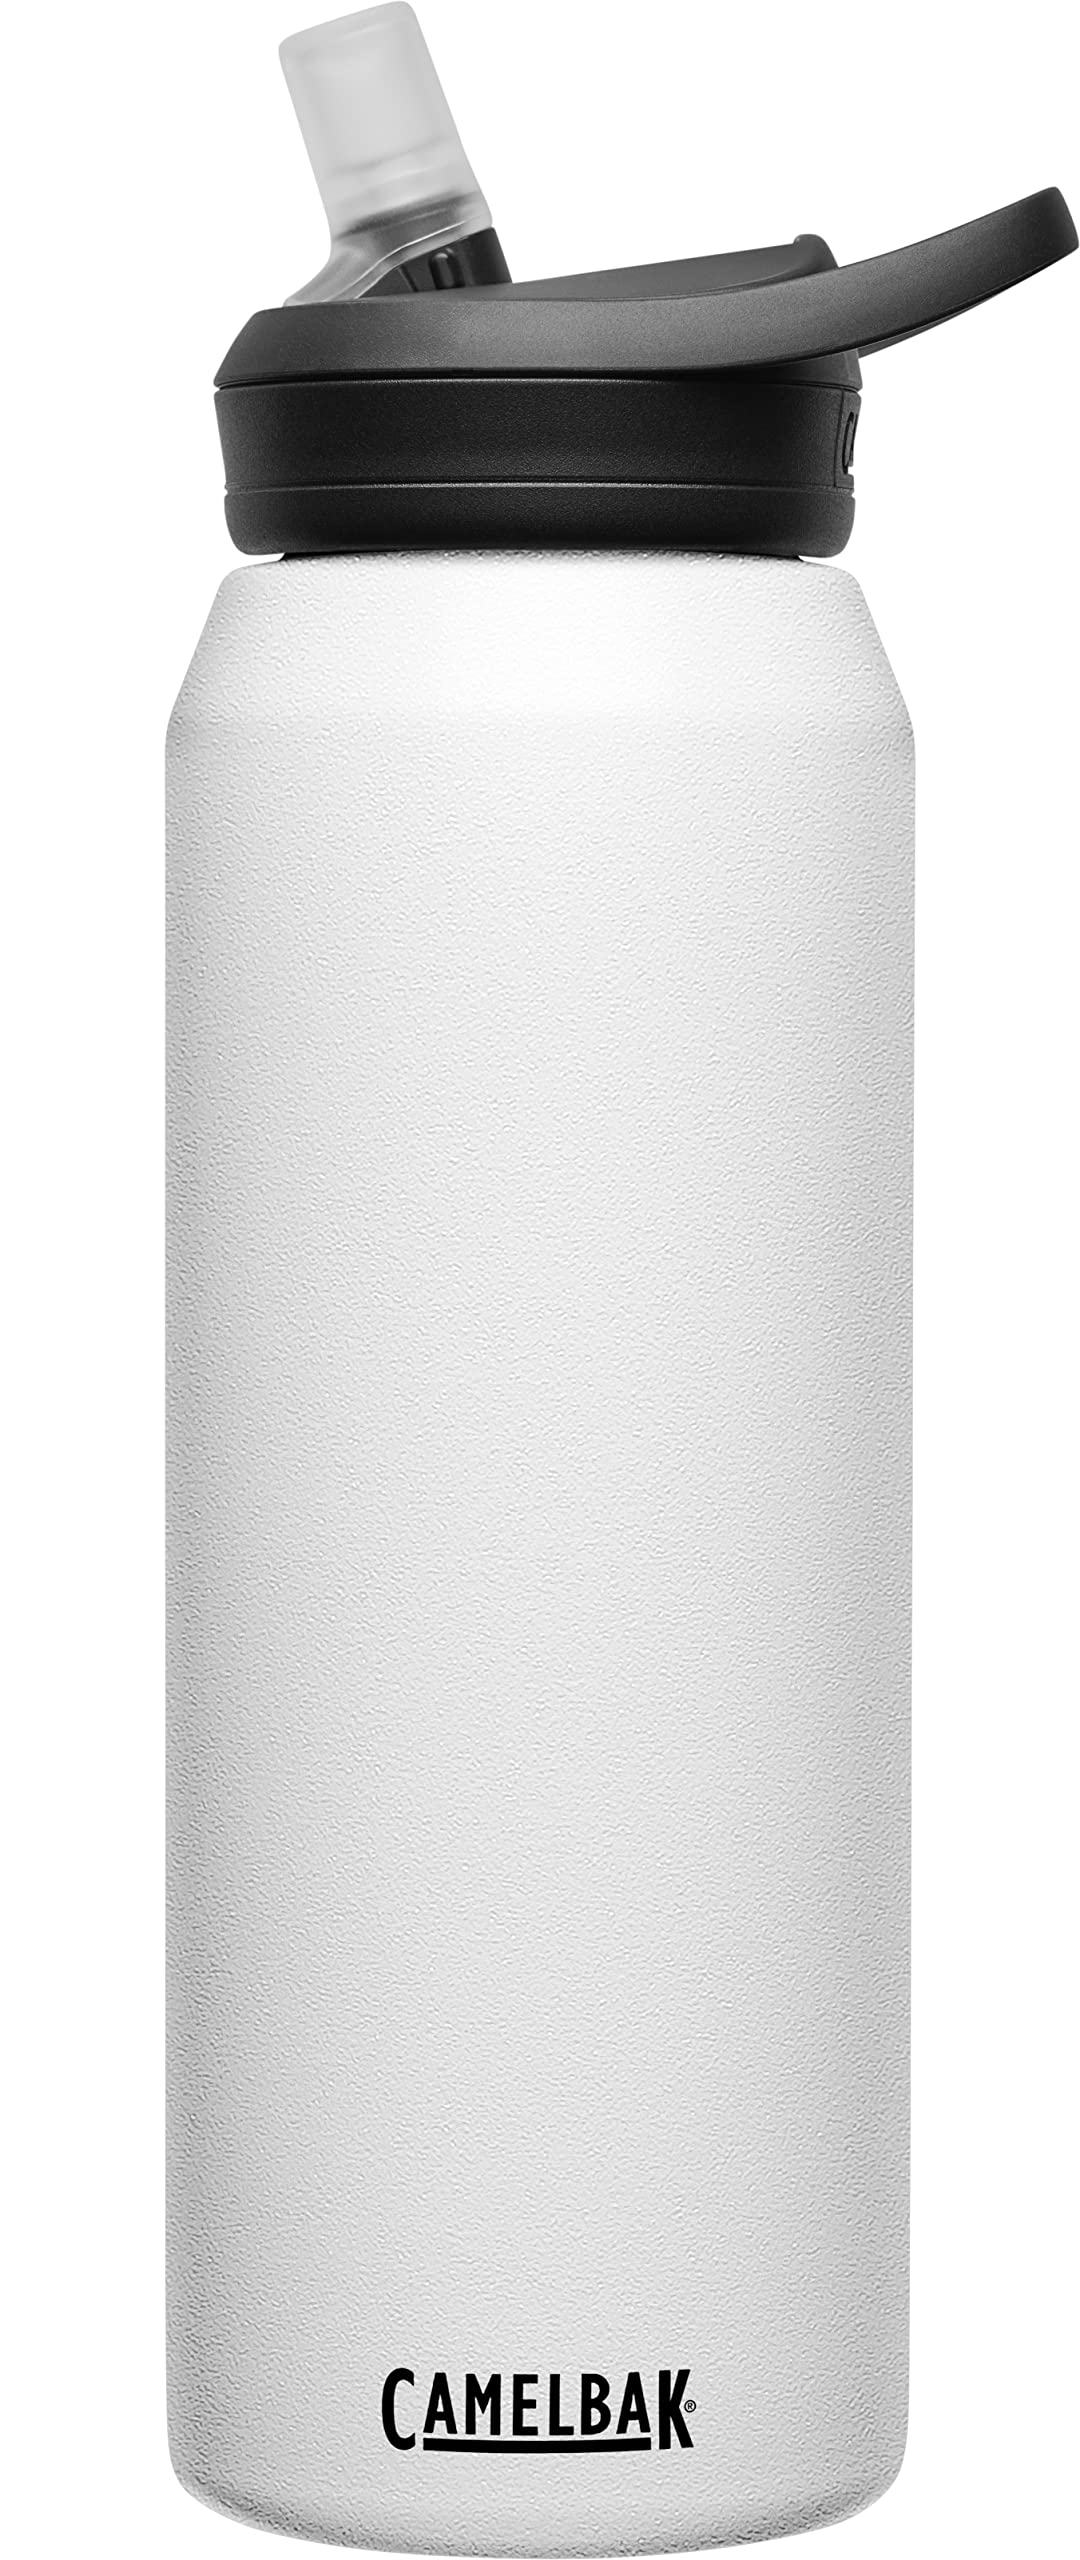 (White) CamelBak eddy+ Water Bottle with Straw 32oz - Insulated Stainless Steel, White - $19.97